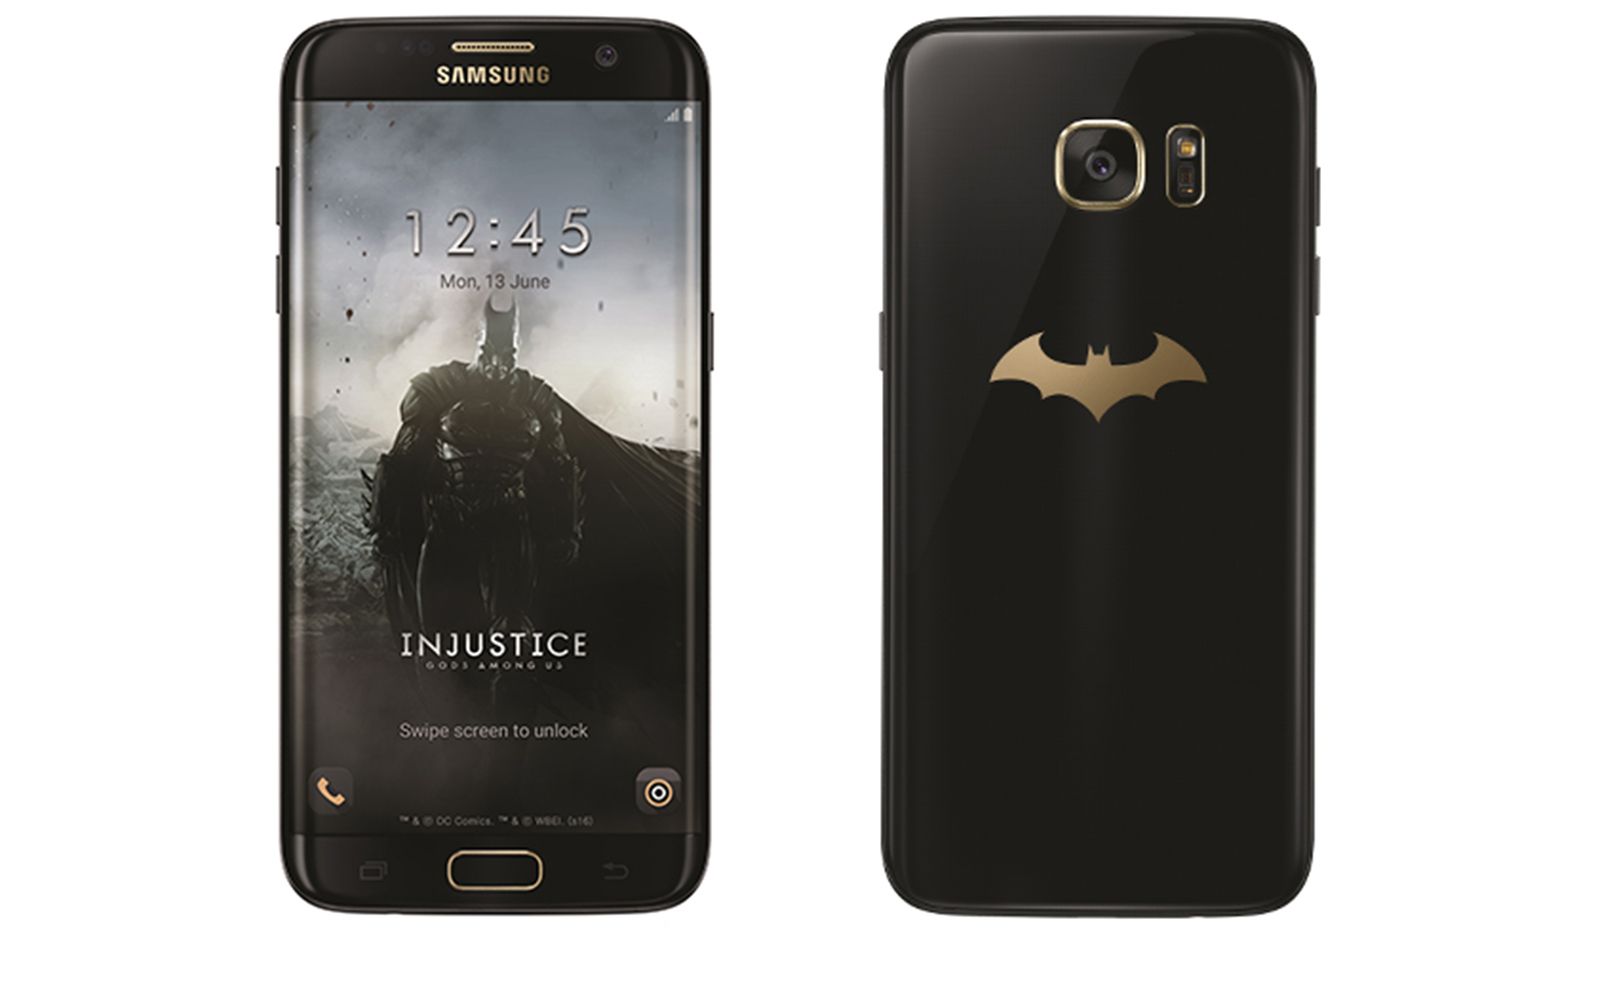 batman samsung galaxy s7 edge injustice edition is official comes with black gear vr image 1